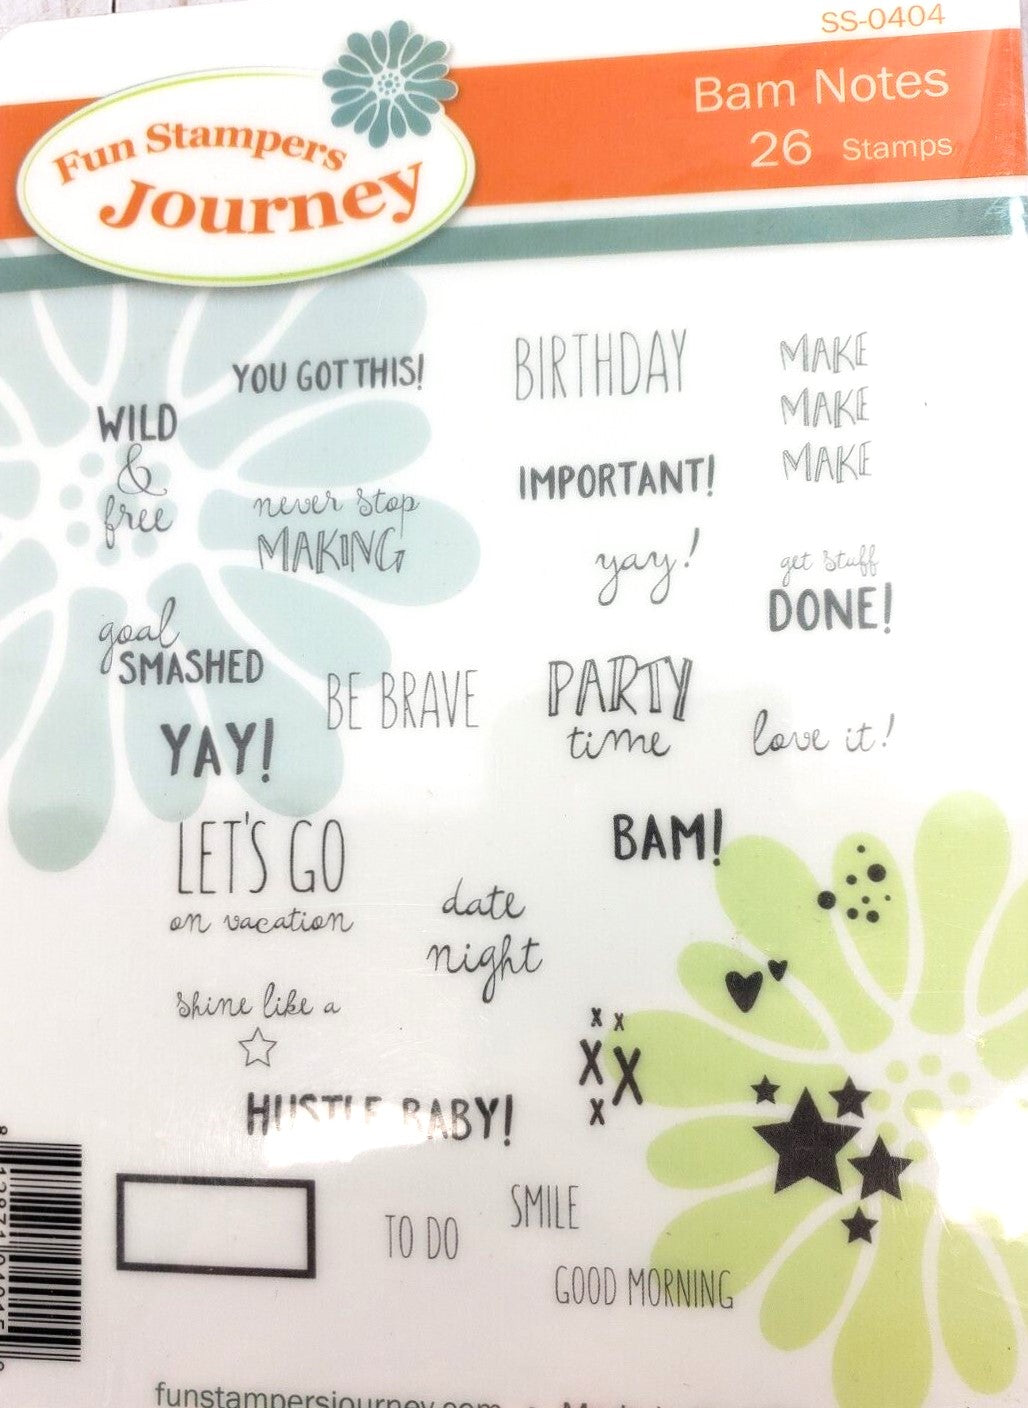 Fun Stampers Journey Bam Notes Rubber Stamps